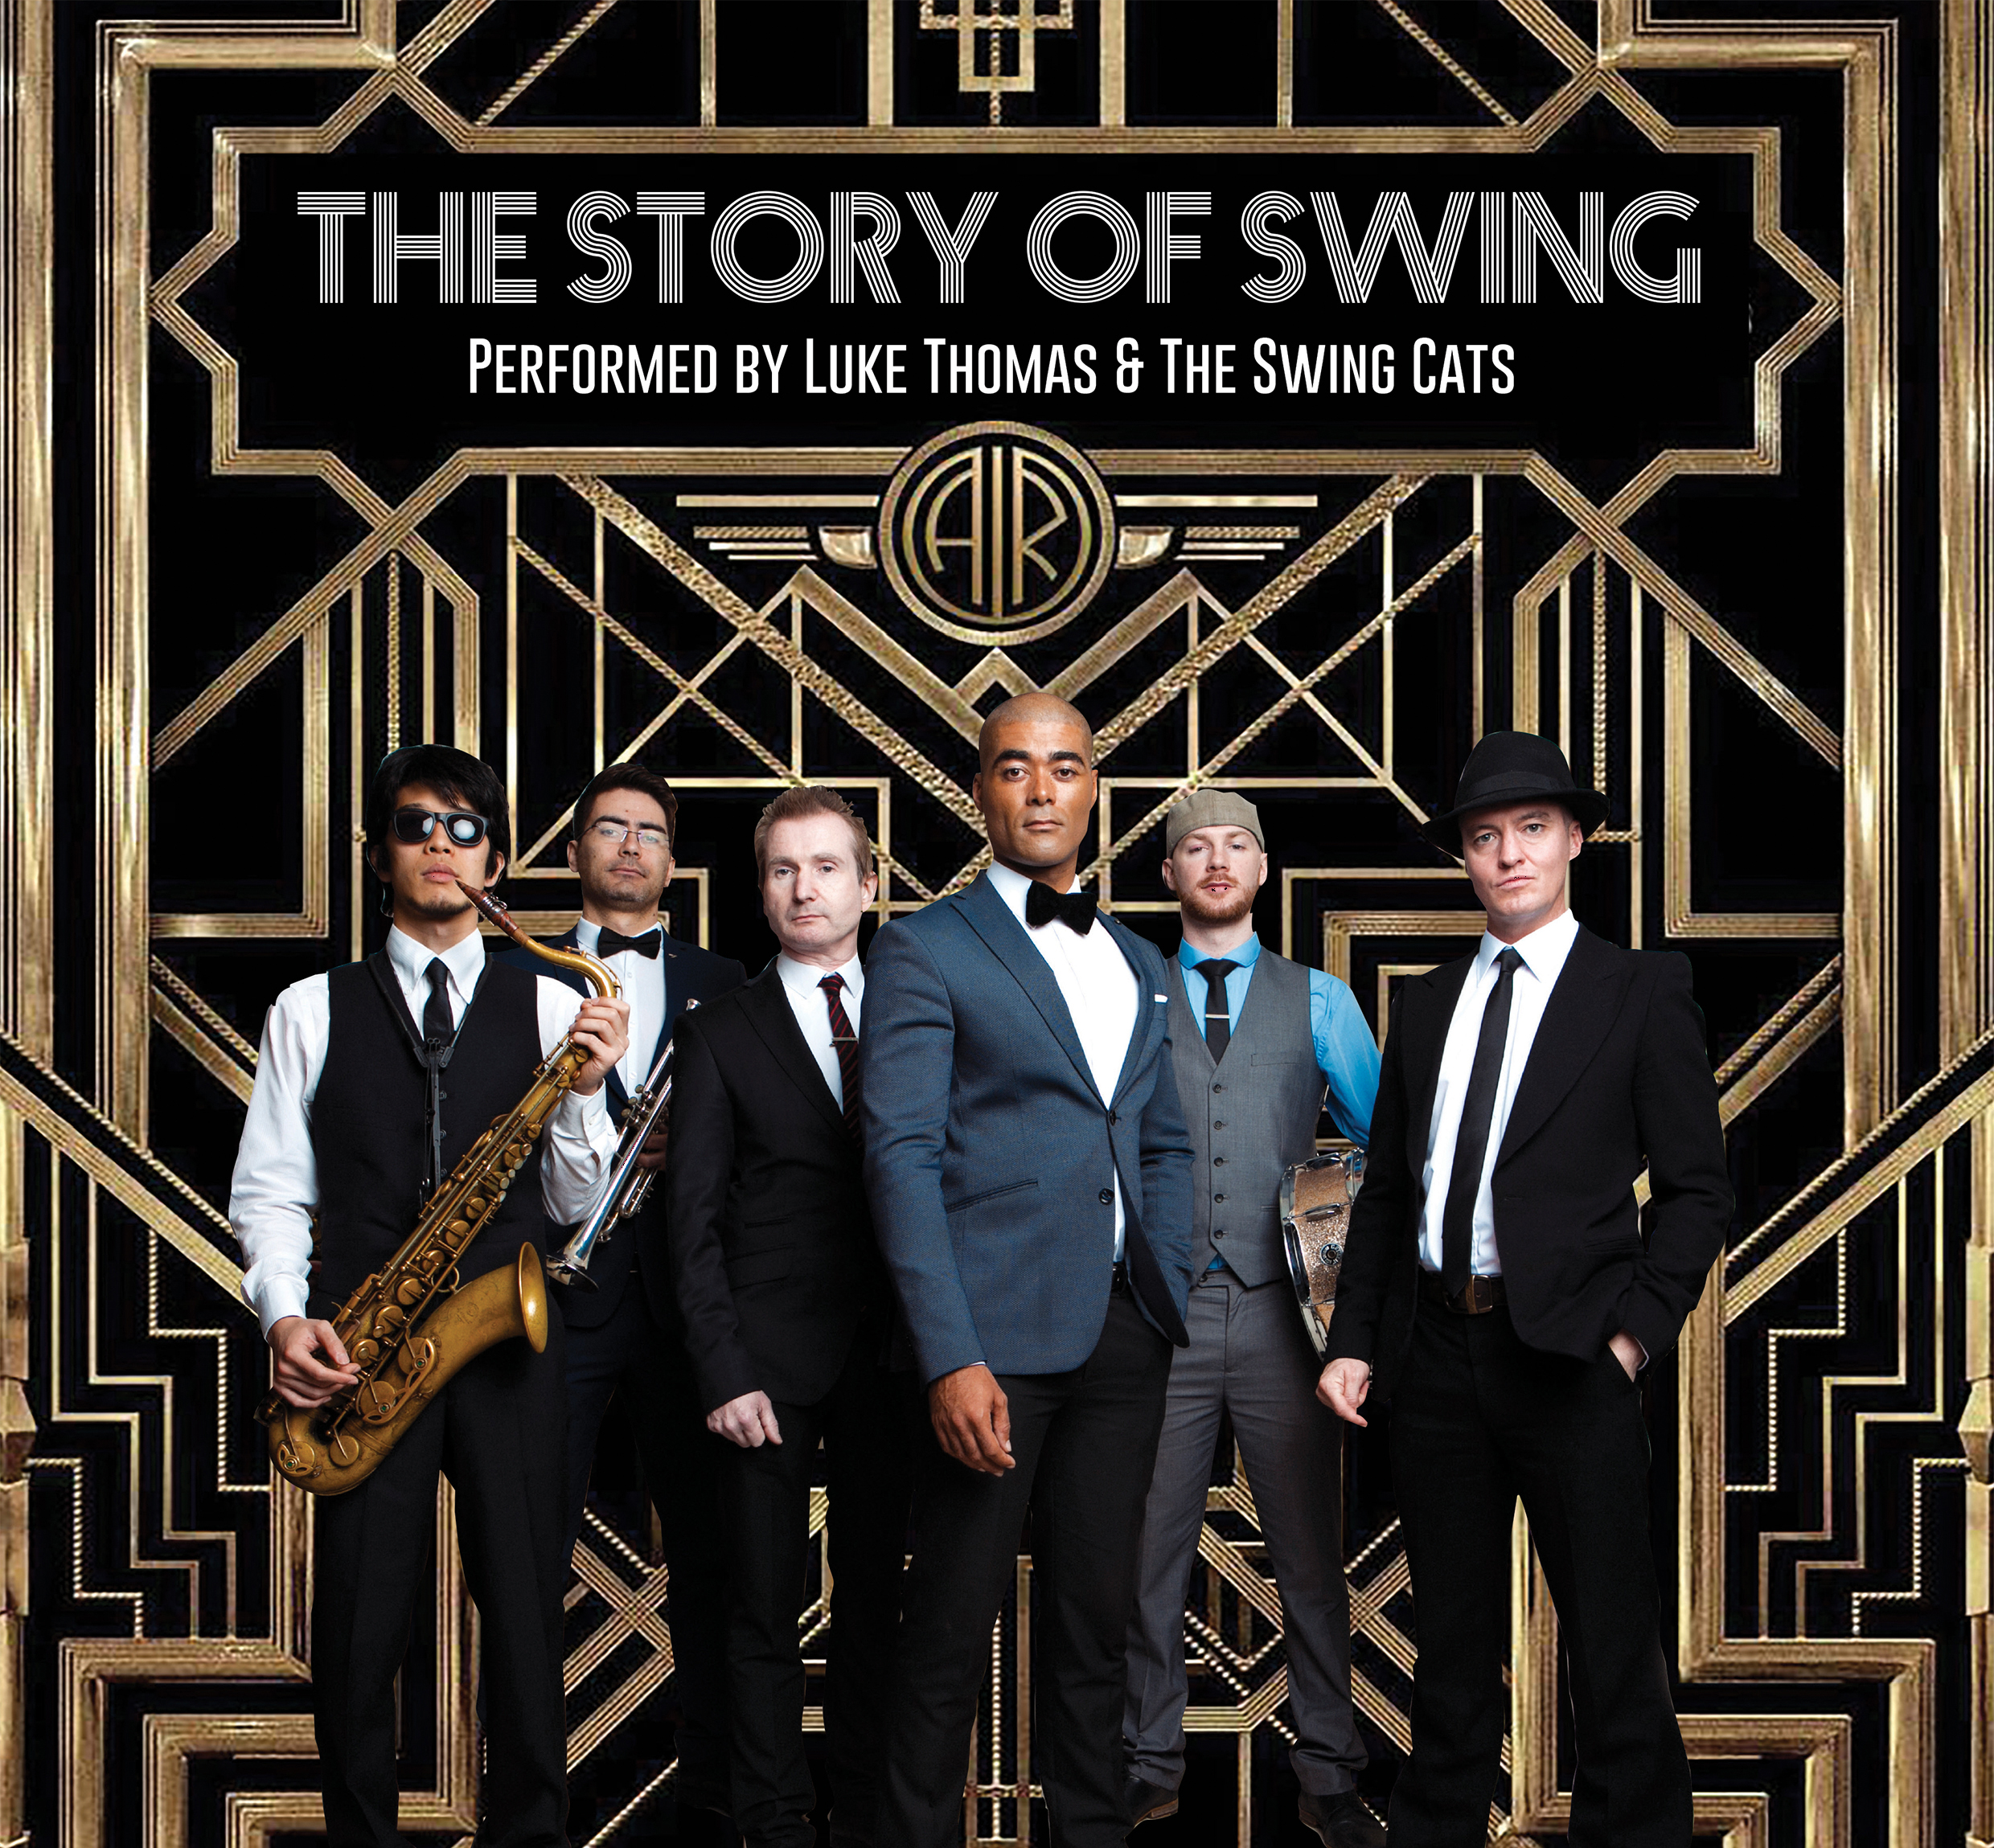 The Swing Cats - The Story of Swing